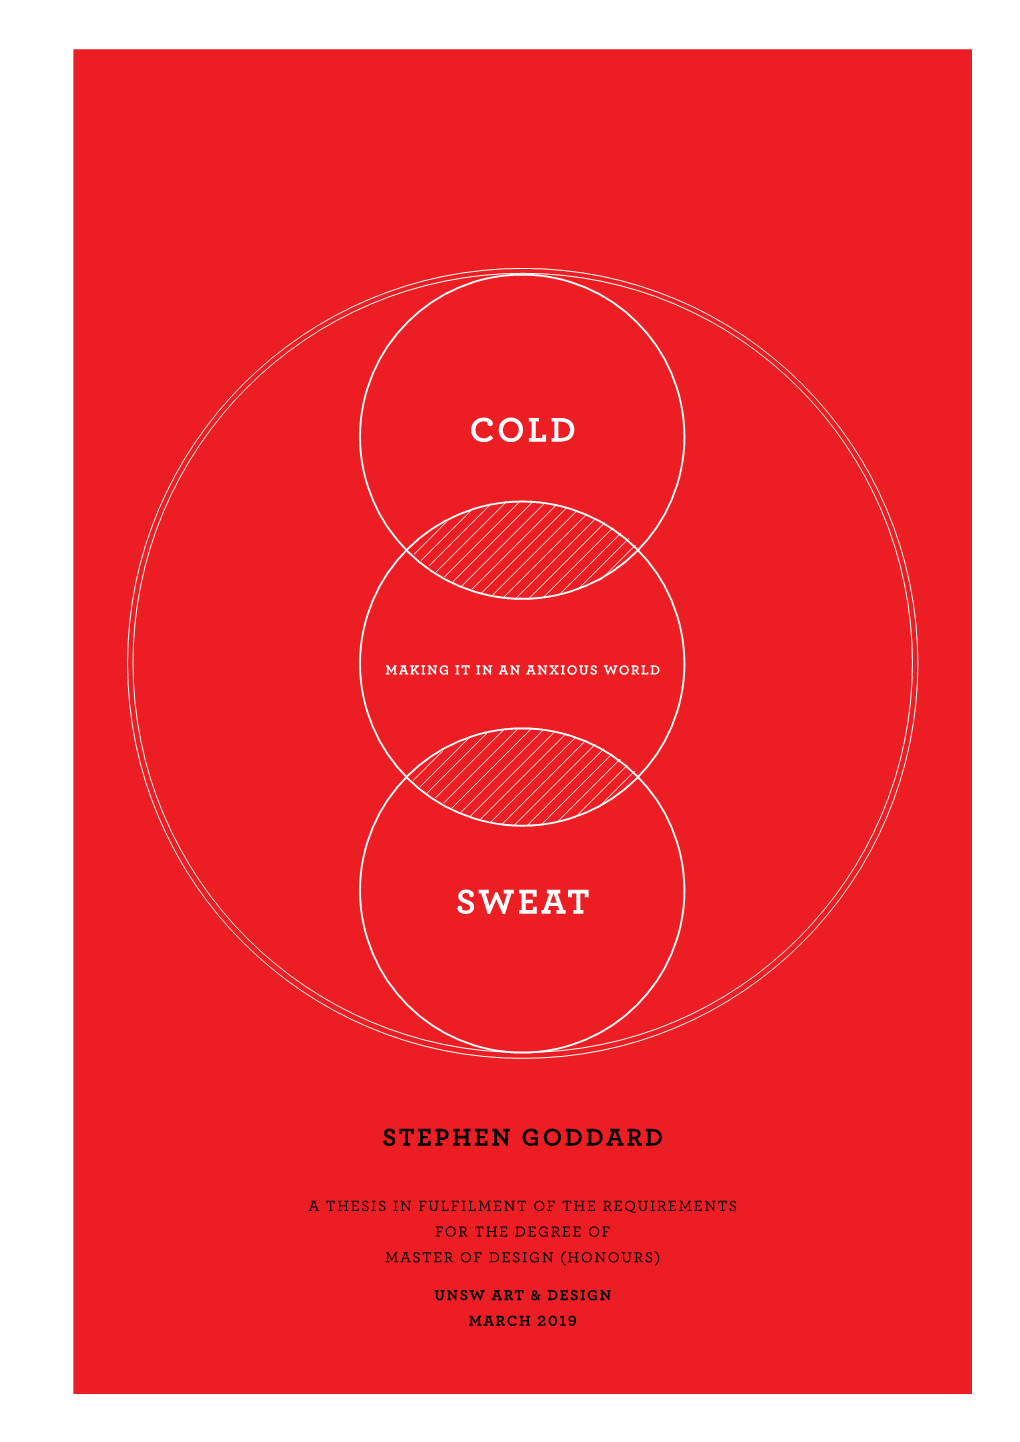 Cold Sweat: Making It in an Anxious World